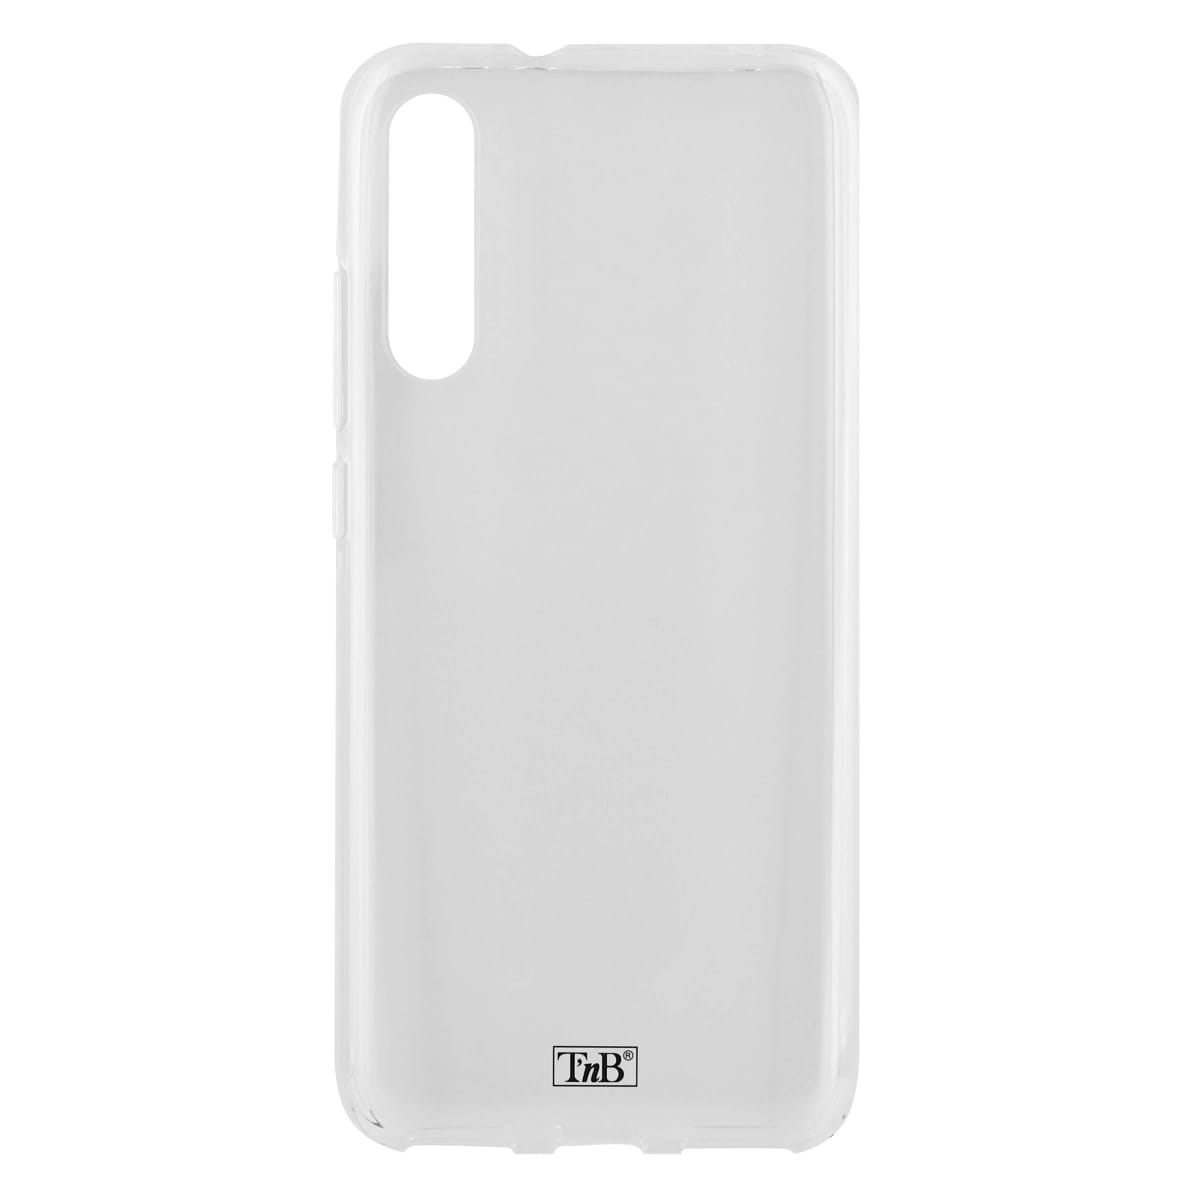 Protect your Xiaomi MI A3 with this soft silicone case.